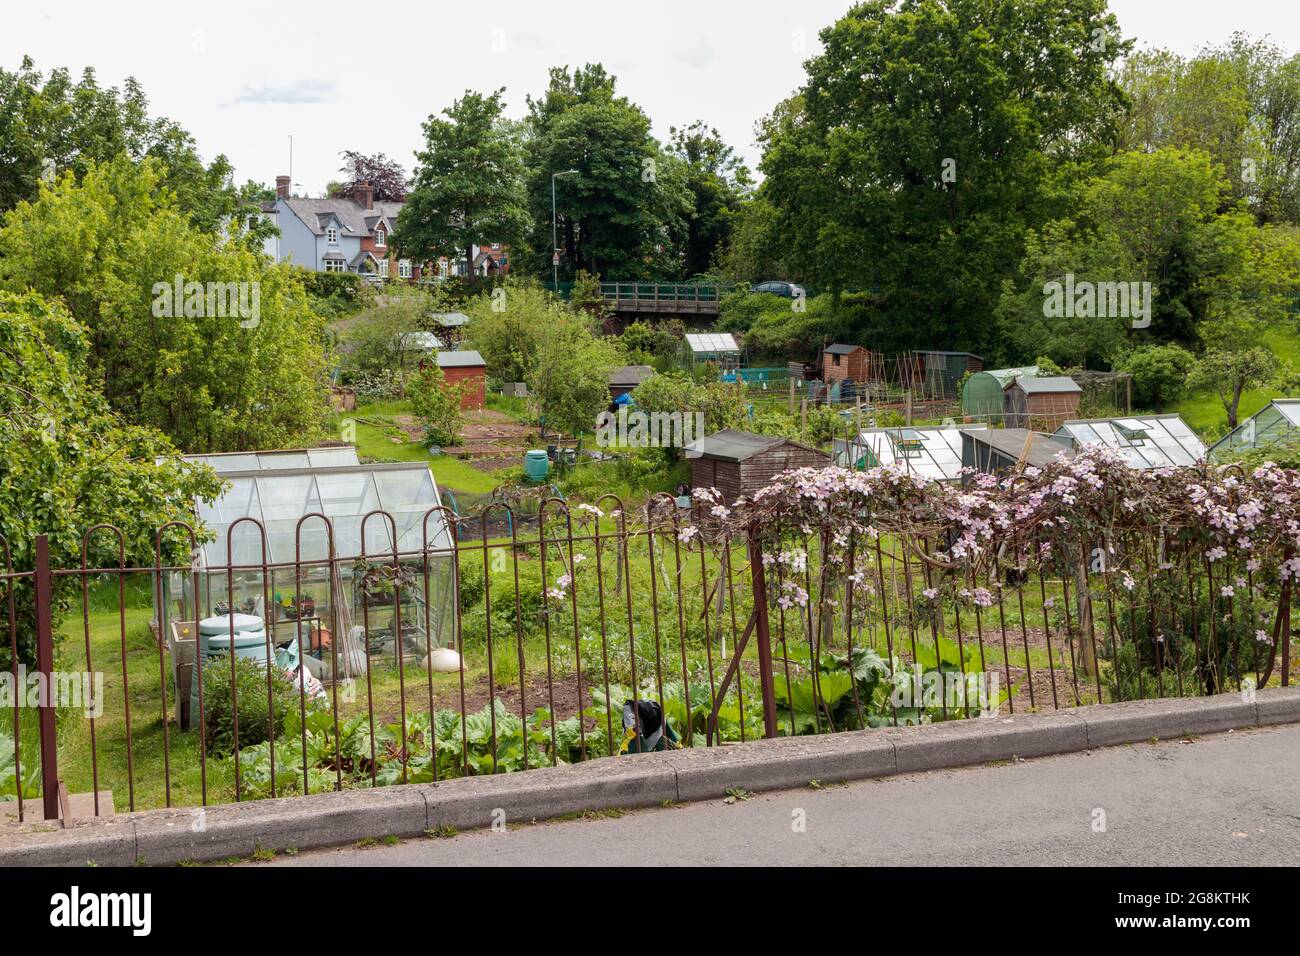 KENILWORTH, WARWICKSHIRE, UNITED KINGDOM - MAY 29, 2021: View of allotments off Manor Road Stock Photo